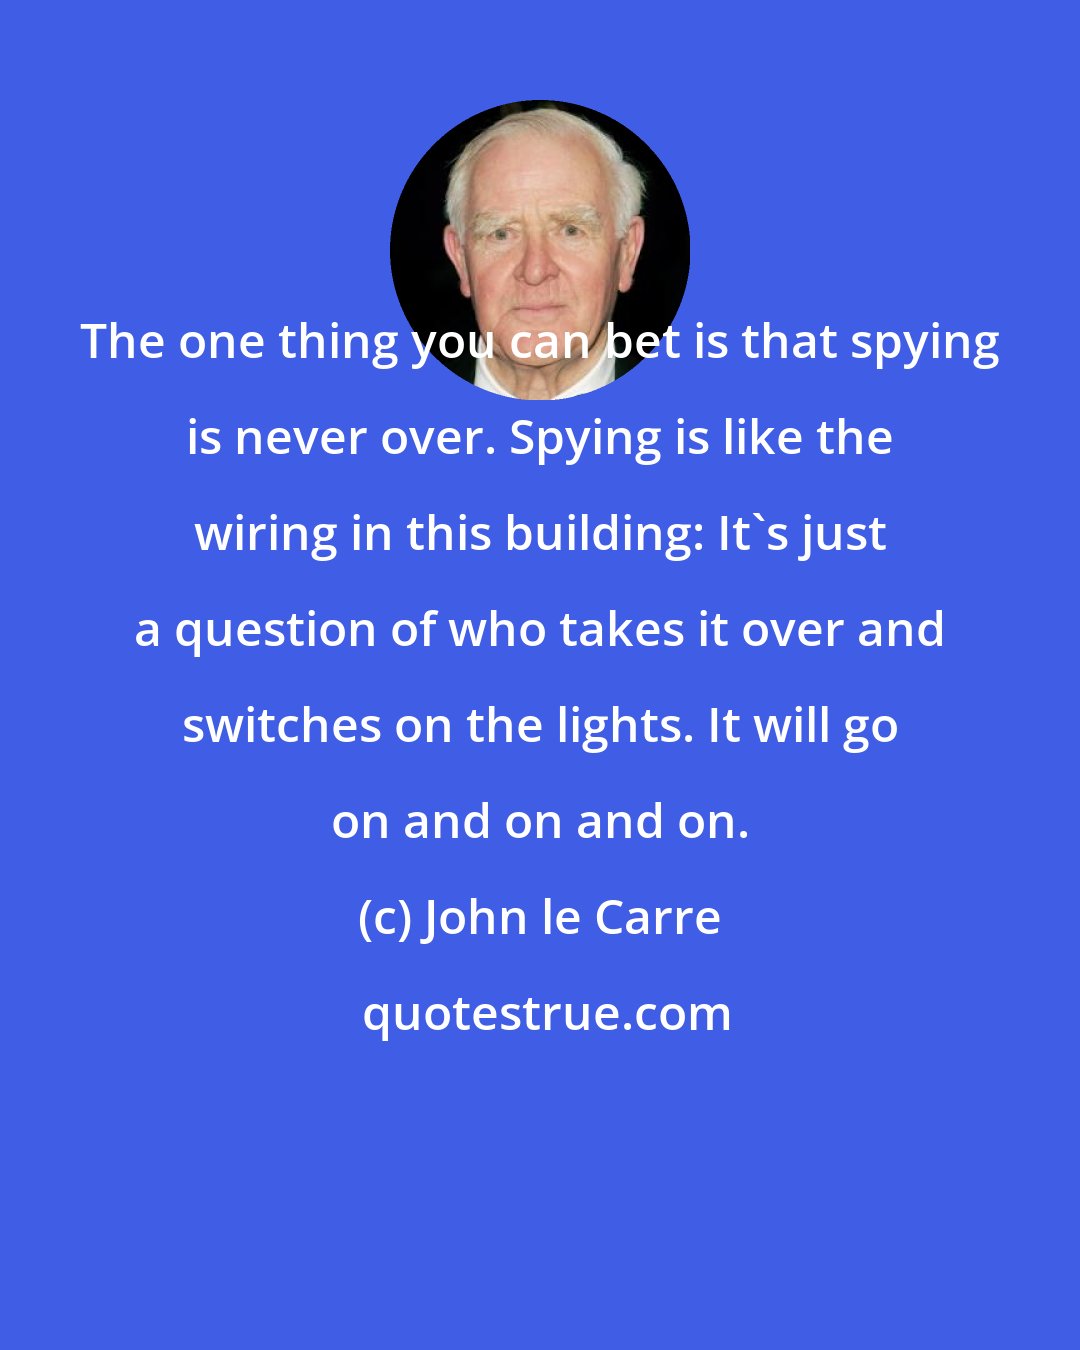 John le Carre: The one thing you can bet is that spying is never over. Spying is like the wiring in this building: It's just a question of who takes it over and switches on the lights. It will go on and on and on.